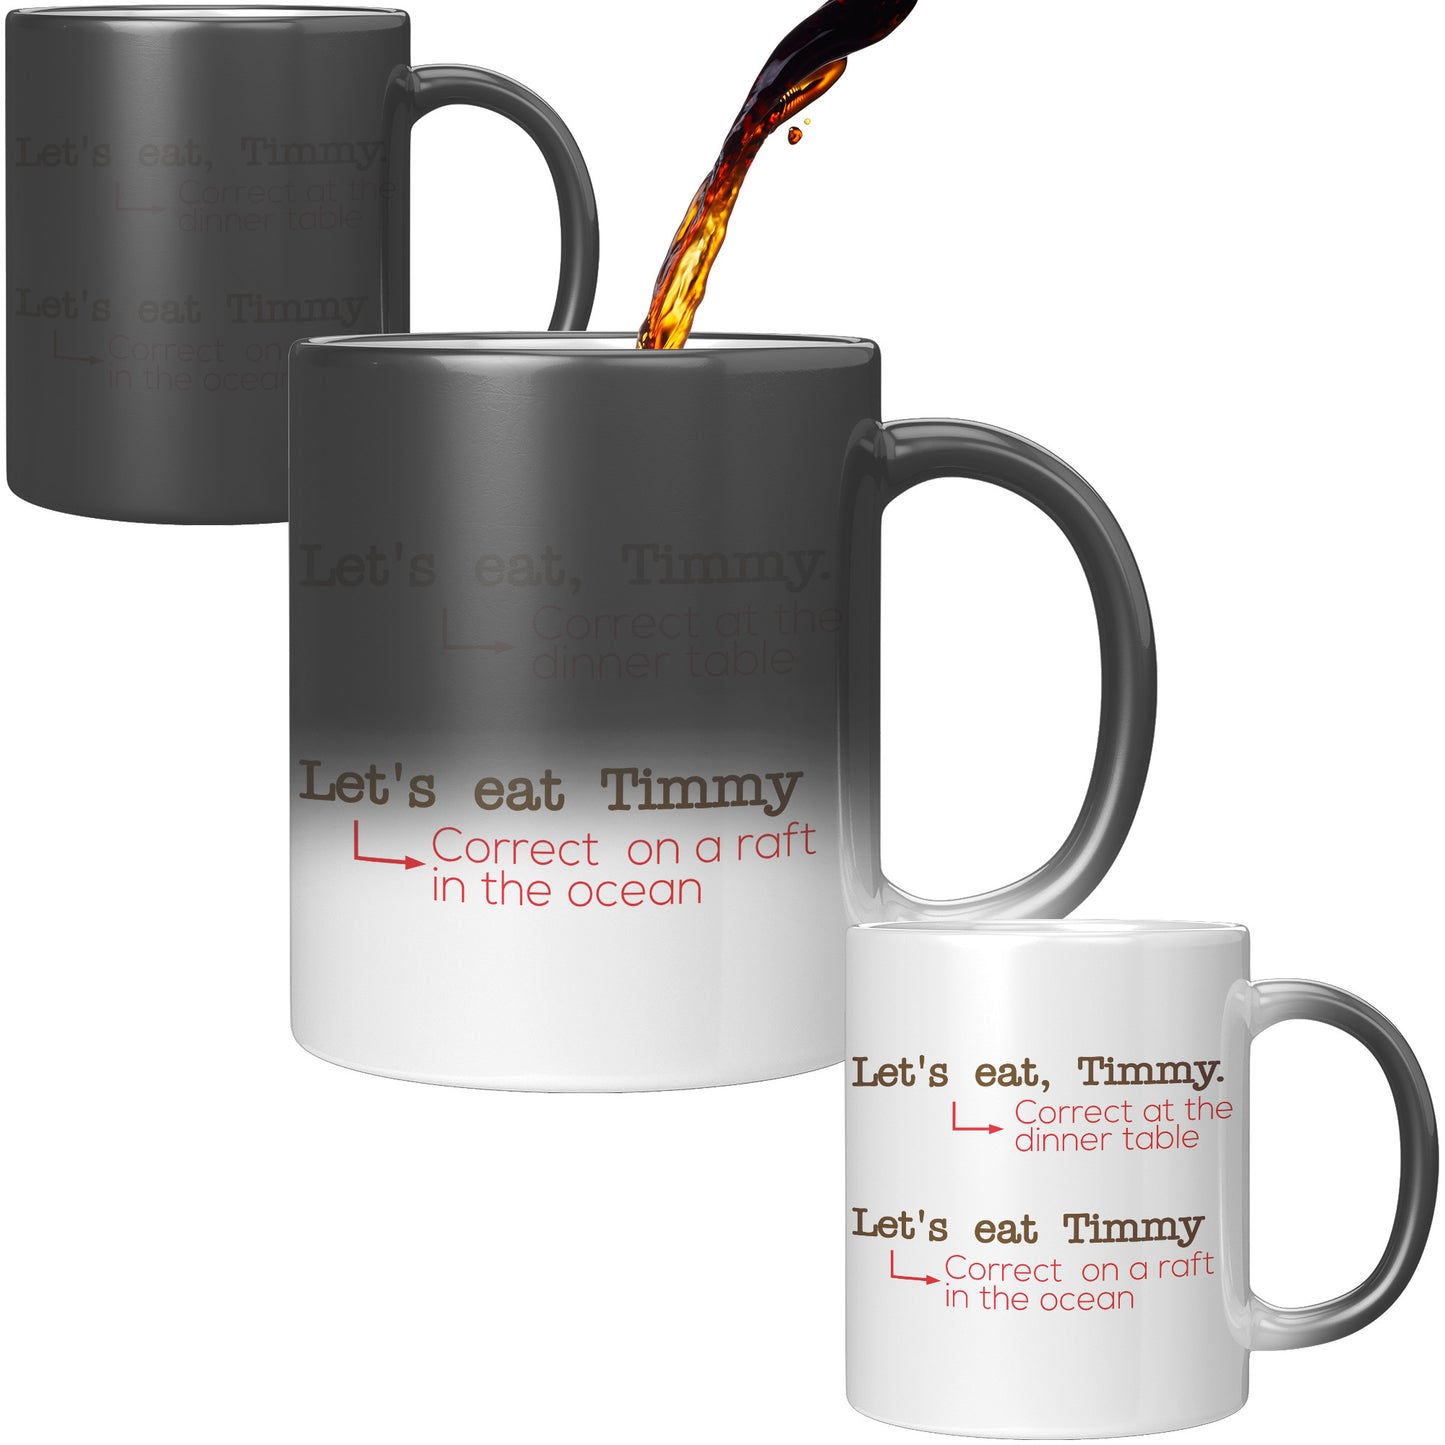 Let's Eat, Timmy. Correct At The Dinner Table. Let's Eat Timmy. Correct On A Raft In The Ocean | Magic Mug